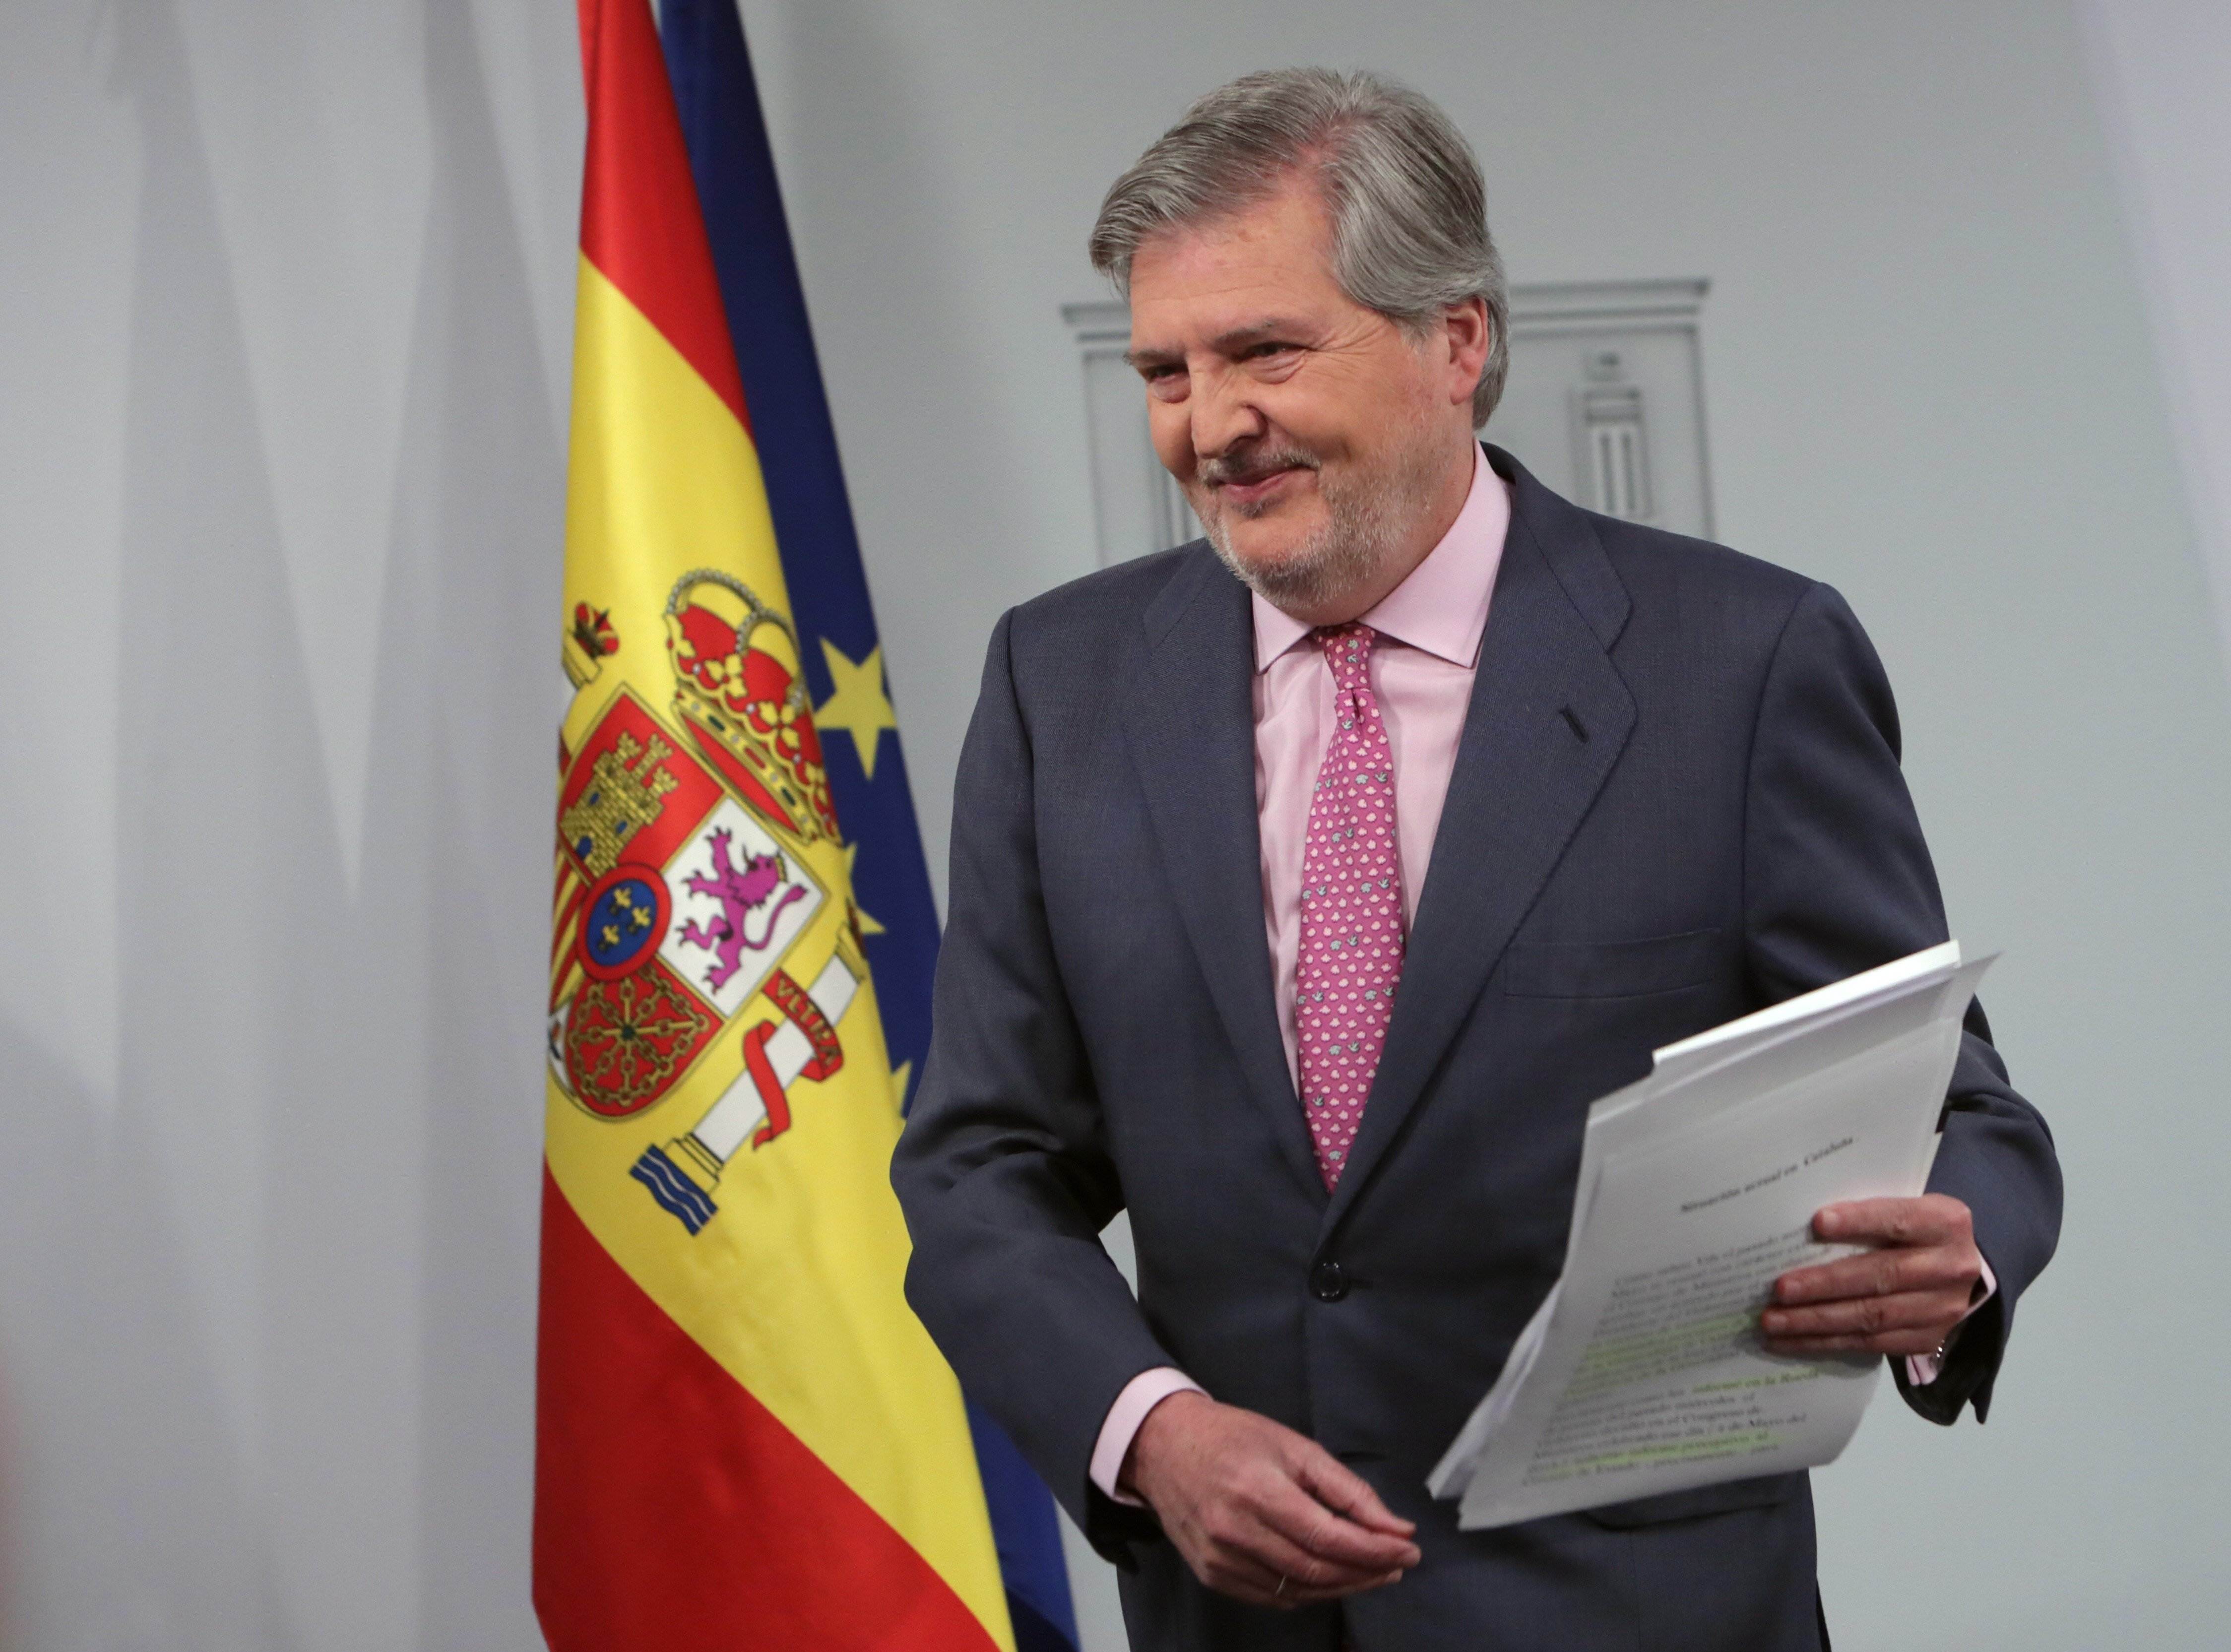 Rajoy appeals to Constitutional Court to block non-presential investiture